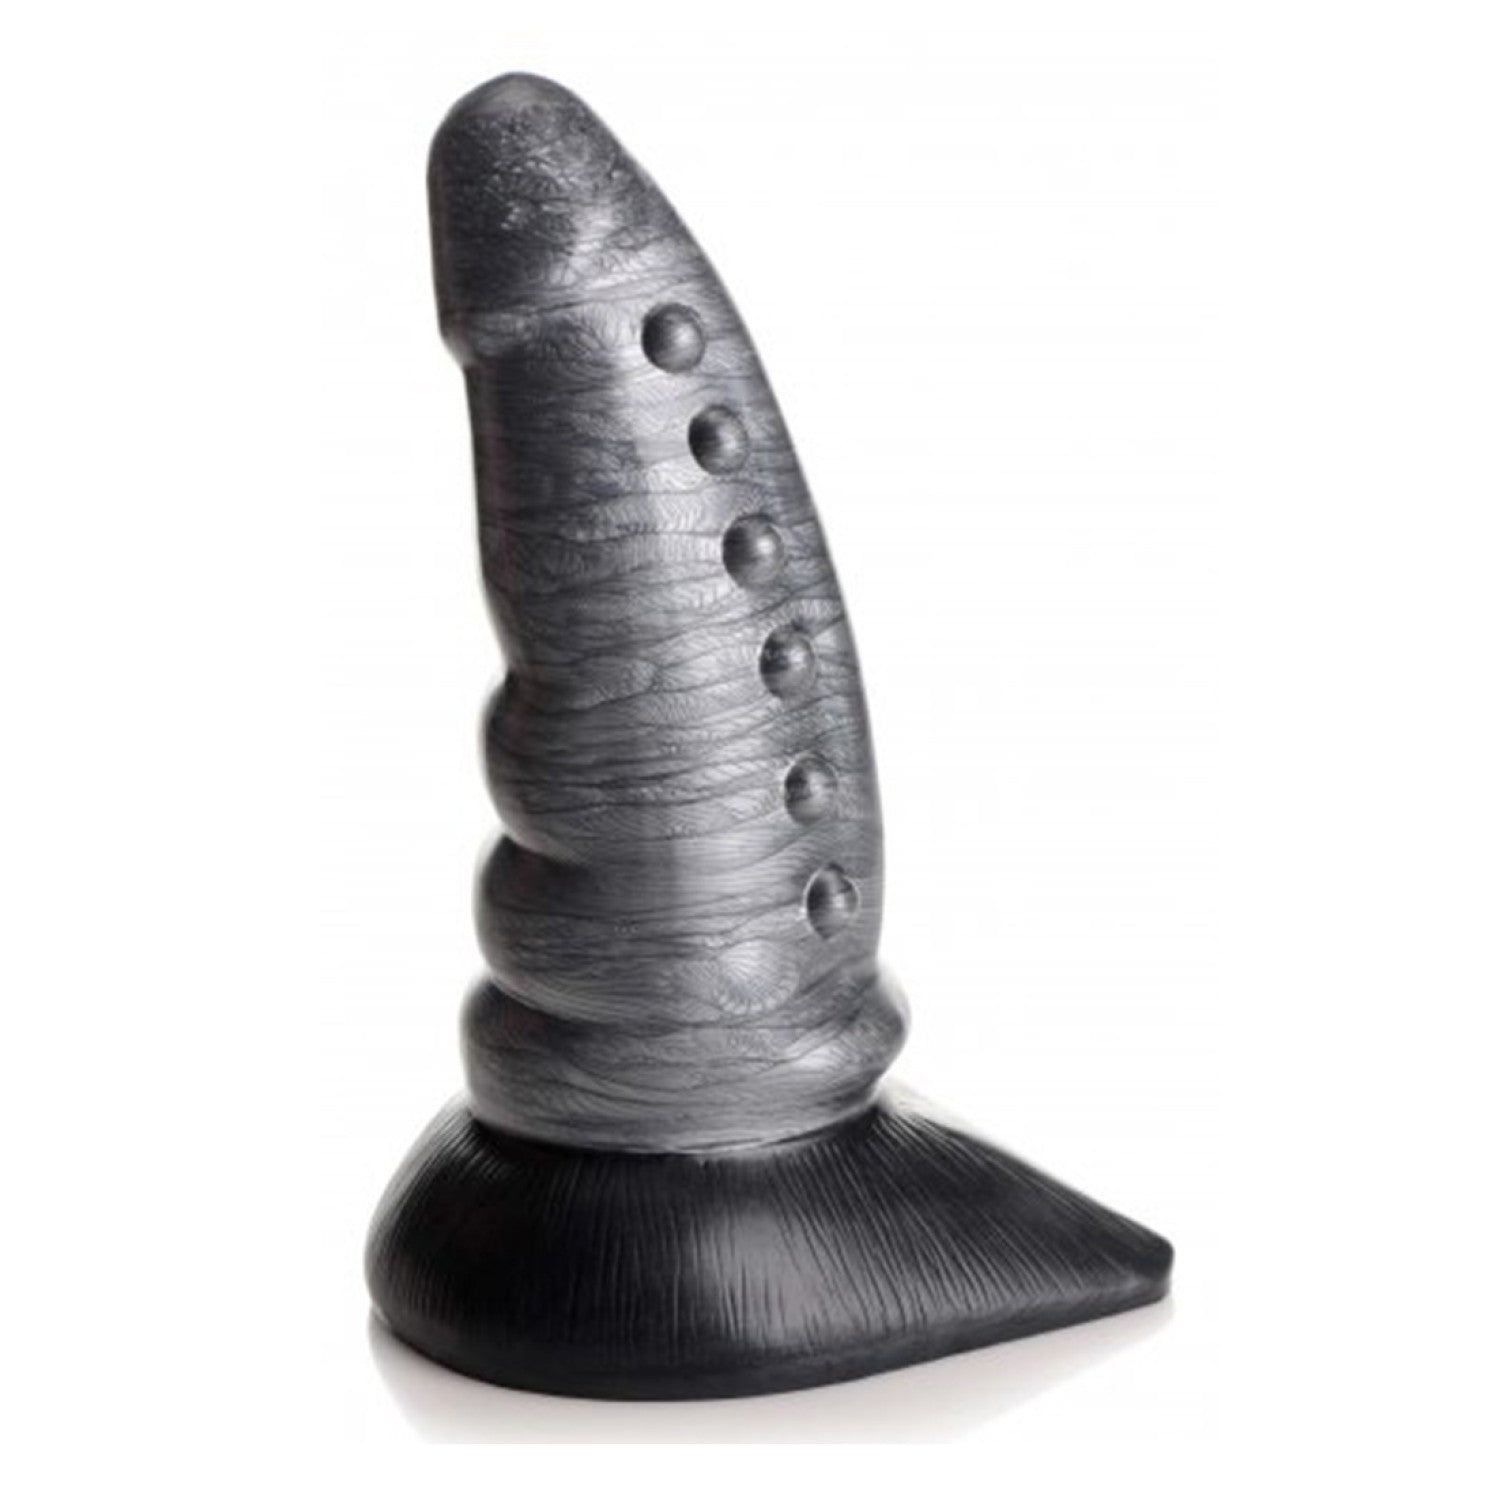 Image of XR Brands Creature Cocks Beastly Dildo 31 cm